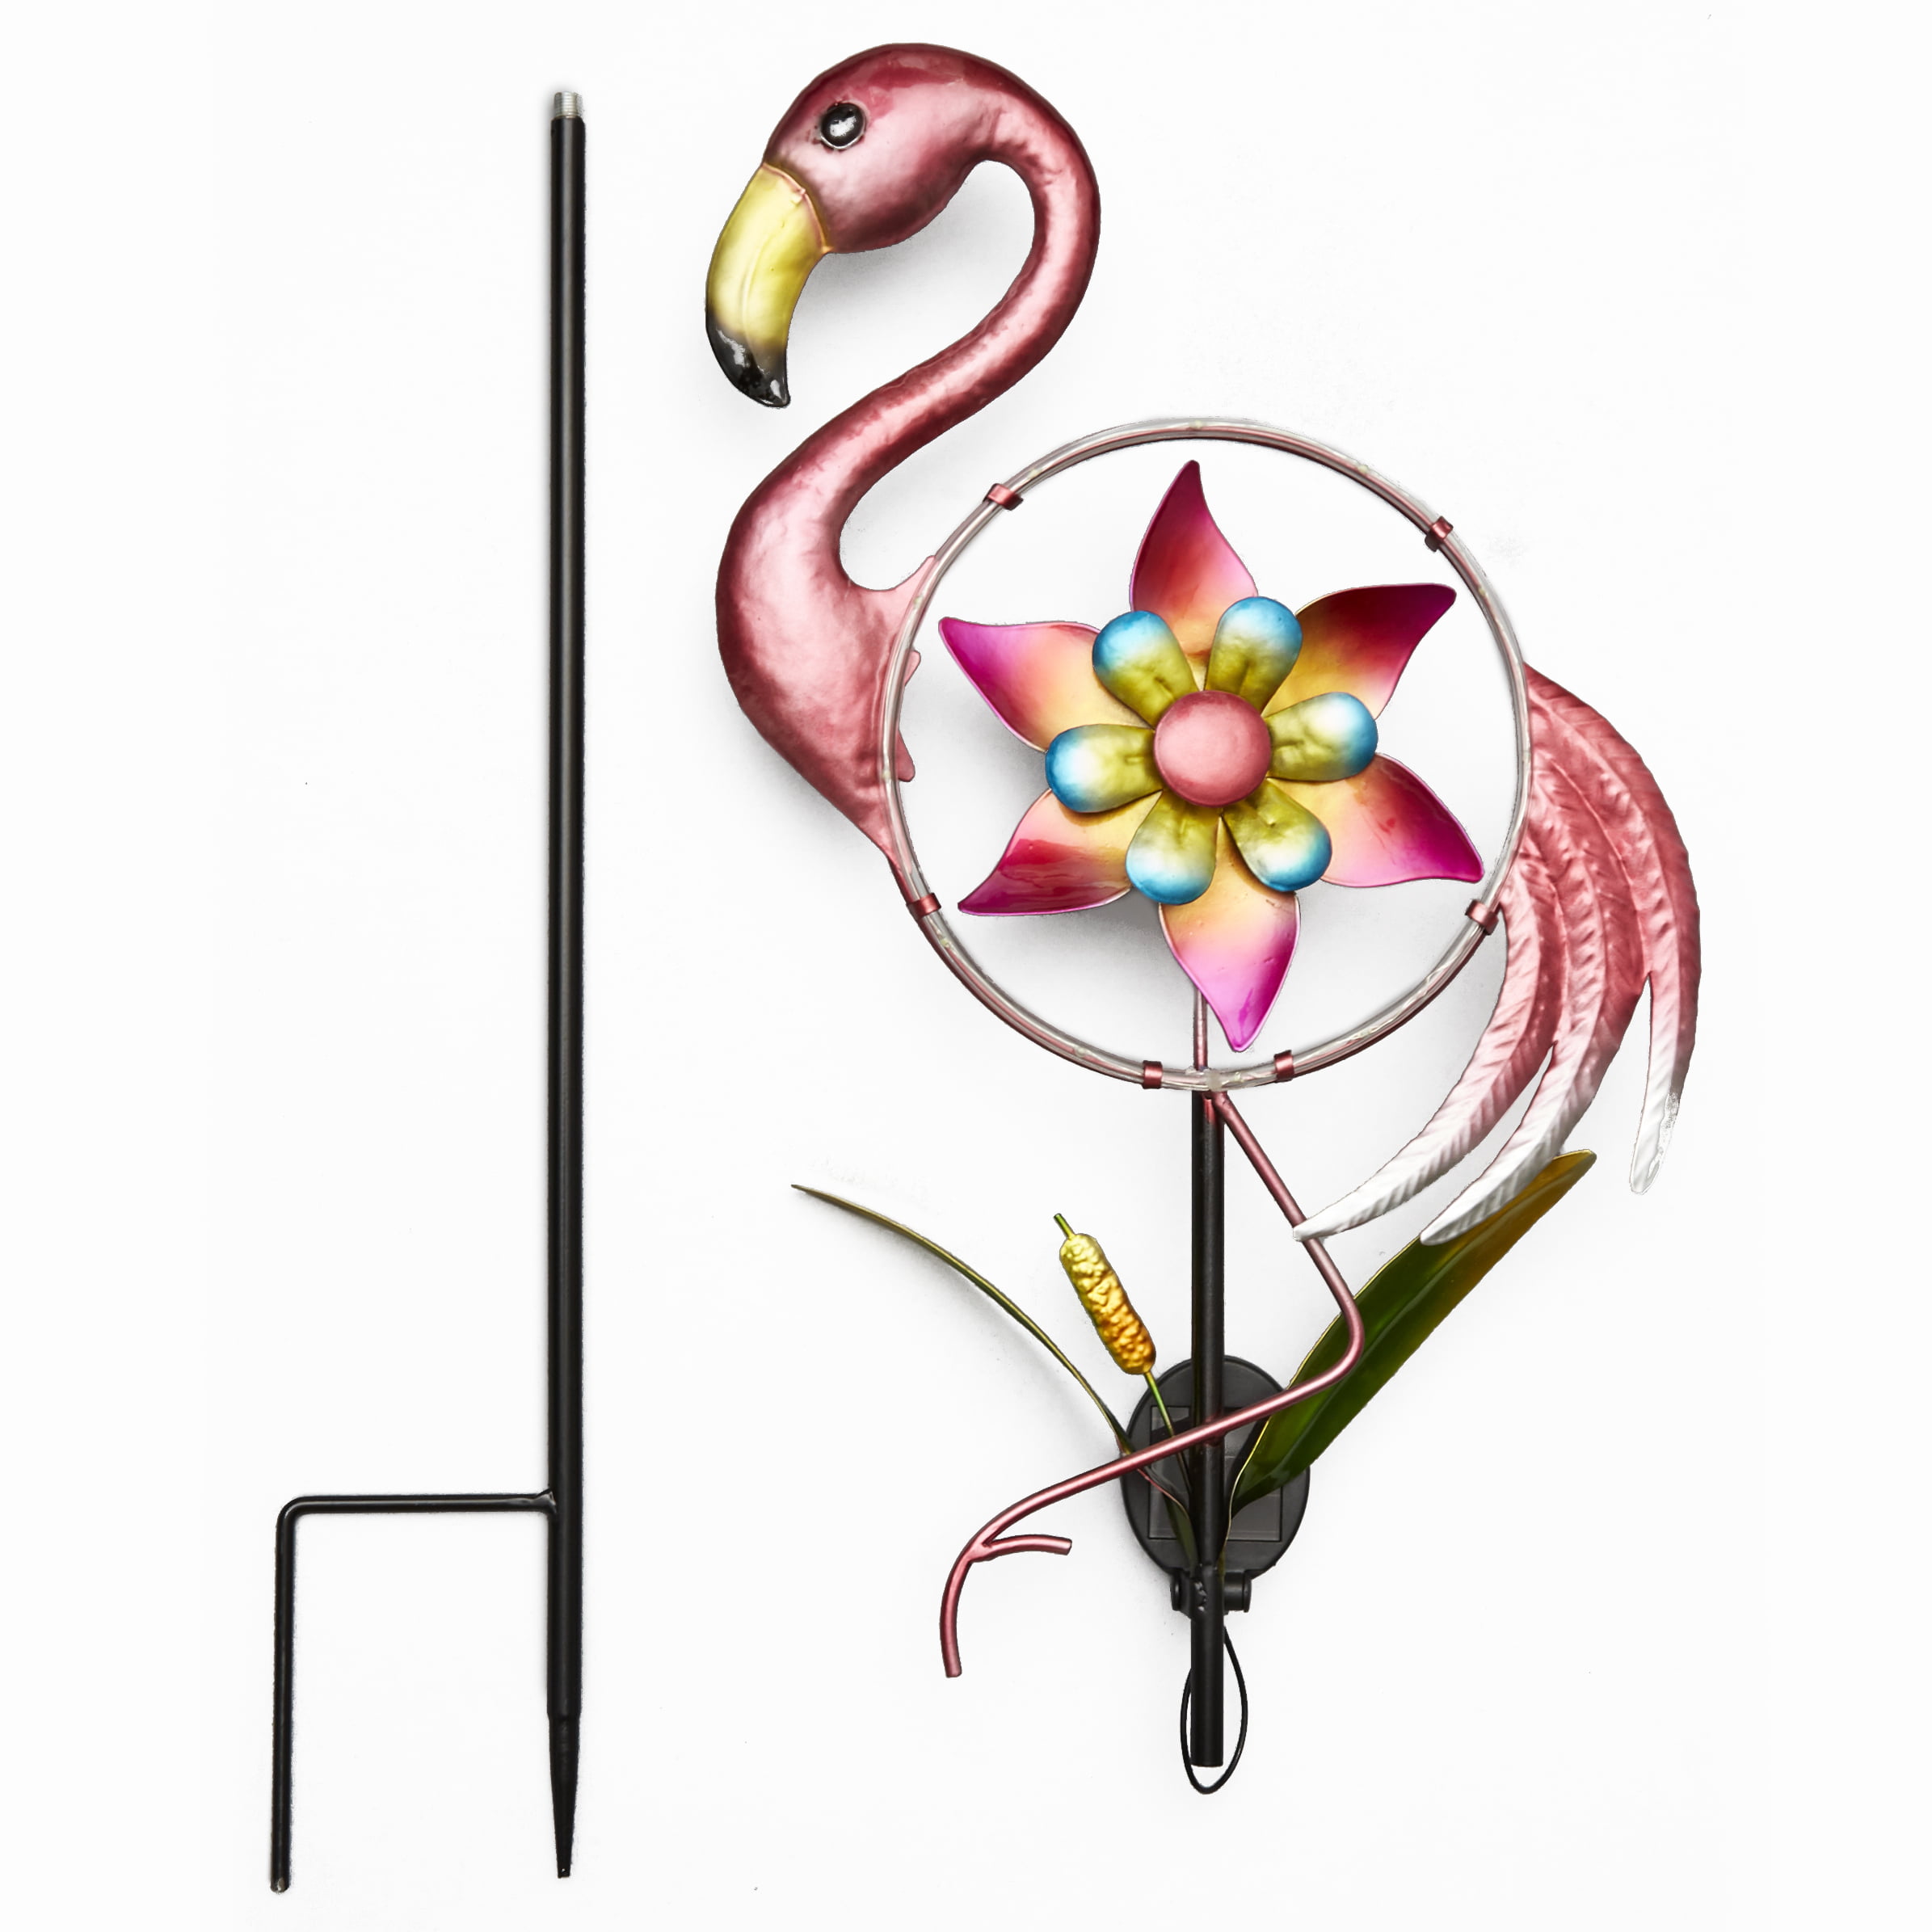 Features Solar-Powered Glass Ball LED Lights 12 x 44 Inches Best as Kinetic Art Flower Decor Exhart Red Rose Wind Spinner Garden Stake w/Solar Crackle Ball Rose Garden Spinner Metal Stake